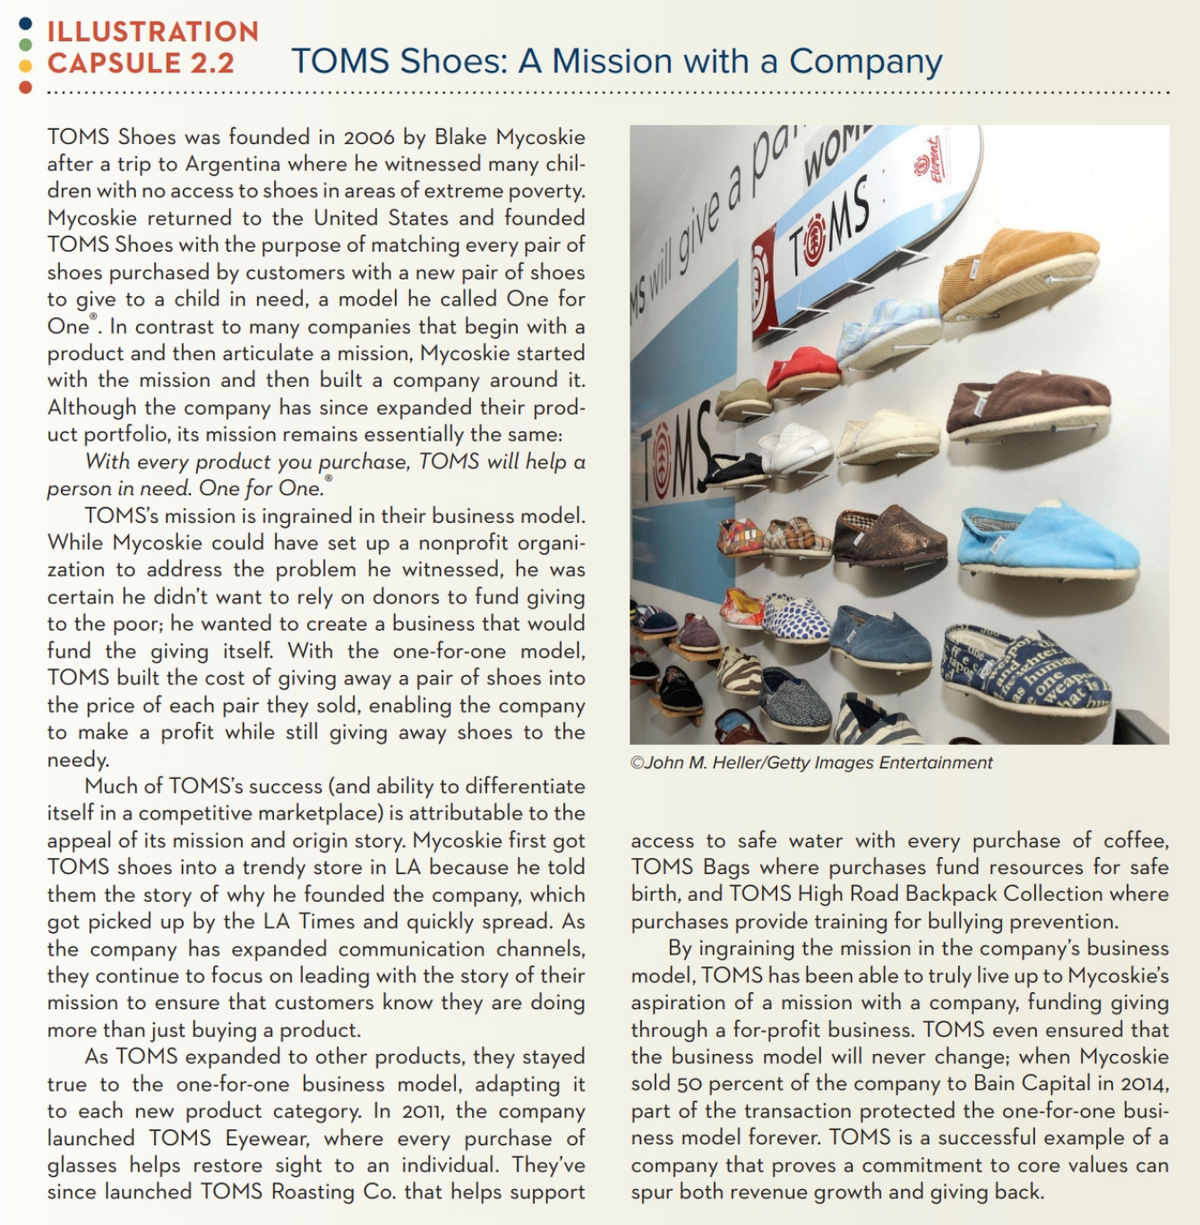 ILLUSTRATION
CAPSULE 2.2
TOMS Shoes: A Mission with a Company
TOMS Shoes was founded in 2006 by Blake Mycoskie
after a trip to Argentina where he witnessed
dren with no access to shoes in areas of extreme poverty.
Mycoskie returned to the United States and founded
TOMS Shoes with the purpose of matching every pair of
shoes purchased by customers with a new pair of shoes
to give to a child in need, a model he called One for
One . In contrast to many companies that begin with a
product and then articulate a mission, Mycoskie started
with the mission and then built a company around it.
Although the company has since expanded their prod-
uct portfolio, its mission remains essentially the same:
With every product you purchase, TOMS will help a
person in need. One for One.
TOMS's mission is ingrained in their business model.
While Mycoskie could have set up a nonprofit organi-
zation to address the problem he witnessed, he was
certain he didn't want to rely on donors to fund giving
to the poor; he wanted to create a business that would
fund the giving itself. With the one-for-one model,
TOMS built the cost of giving away a pair of shoes into
the price of each pair they sold, enabling the company
to make a profit while still giving away shoes to the
needy.
Much of TOMS's success (and ability to differentiate
itself in a competitive marketplace) is attributable to the
appeal of its mission and origin story. Mycoskie first got
TOMS shoes into a trendy store in LA because he told
them the story of why he founded the company, which
got picked up by the LA Times and quickly spread. As
the company has expanded communication channels,
they continue to focus on leading with the story of their
mission to ensure that customers know they are doing
more than just buying a product.
As TOMS expanded to other products, they stayed
true to the one-for-one business model, adapting it
to each new product category. In 2011, the company
launched TOMS Eyewear, where every purchase of
glasses helps restore sight to an individual. They've
since launched TOMS Roasting Co. that helps support
many
chil-
TOMS
one
weap
hat
©John M. Heller/Getty Images Entertainment
access to safe water with every purchase of coffee,
TOMS Bags where purchases fund resources for safe
birth, and TOMS High Road Backpack Collection where
purchases provide training for bullying prevention.
By ingraining the mission in the company's business
model, TOMS has been able to truly live up to Mycoskie's
aspiration of a mission with a company, funding giving
through a for-profit business. TOMS even ensured that
the business model will never change; when Mycoskie
sold 50 percent of the company to Bain Capital in 2014,
part of the transaction protected the one-for-one busi-
ness model forever. TOMS is a successful example of a
company that proves a commitment to core values can
spur both revenue growth and giving back.
Eleront
